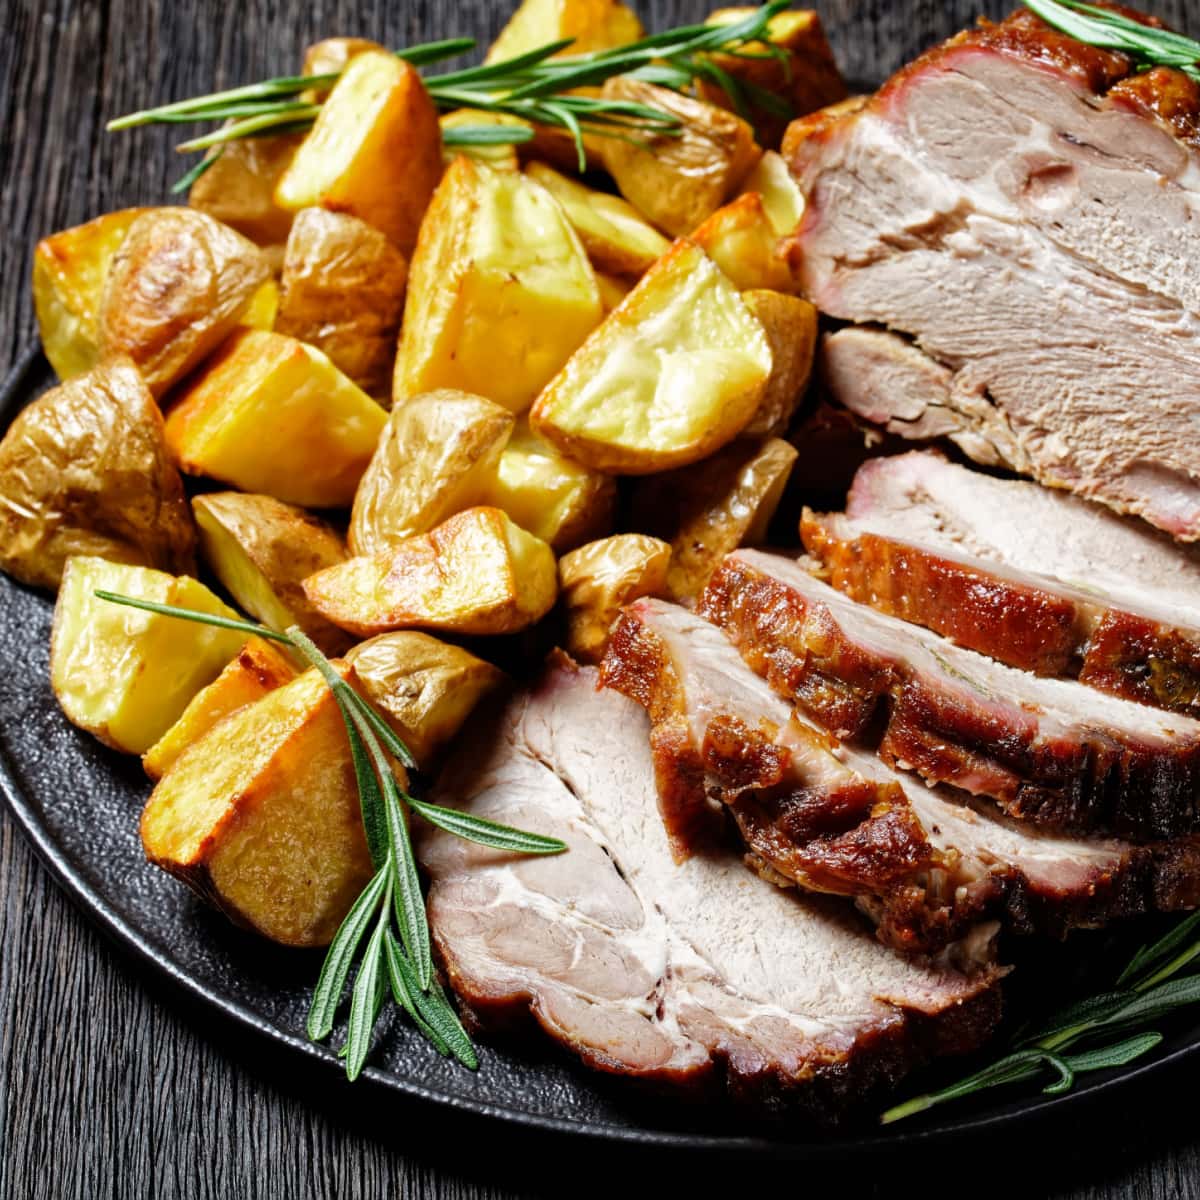 Pork Meat Slices with Rosemary Roasted Potatoes on Sides